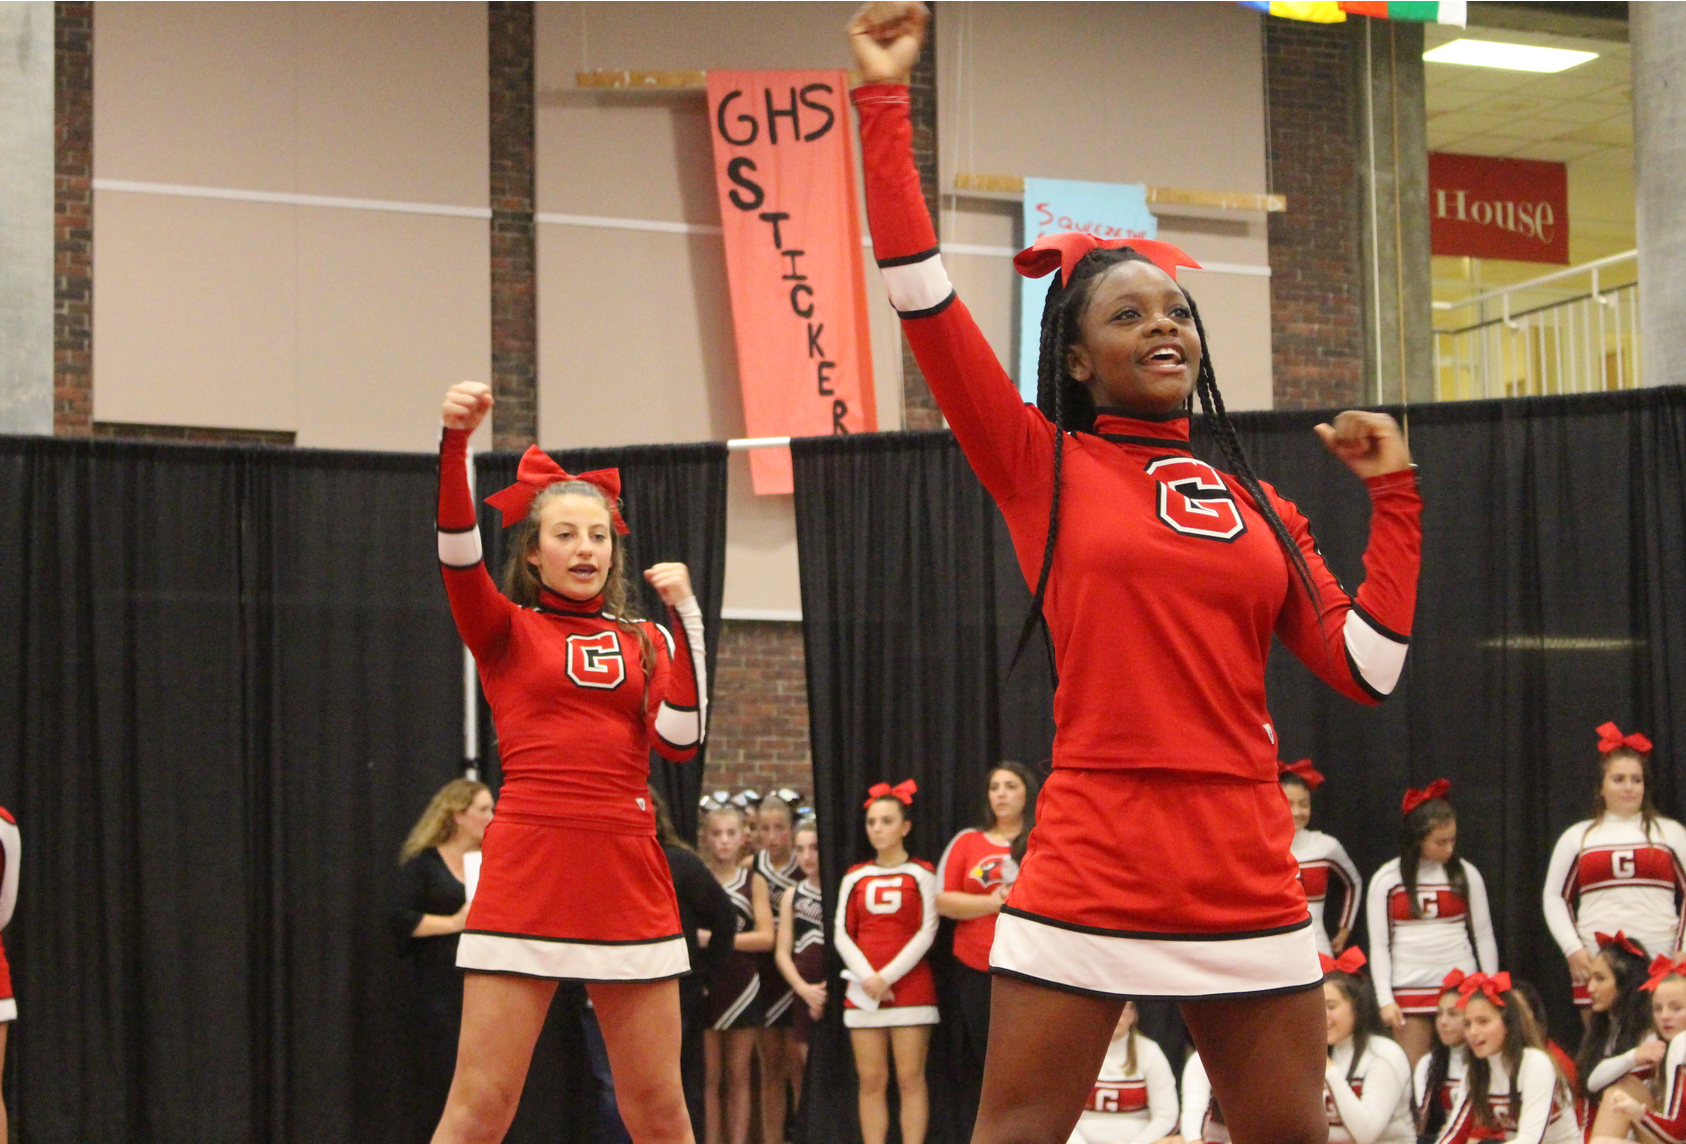 Greenwich High School cheerleaders performed at the GYCL expo in the student center on Nov 5, 2017 Photo: Leslie Yager